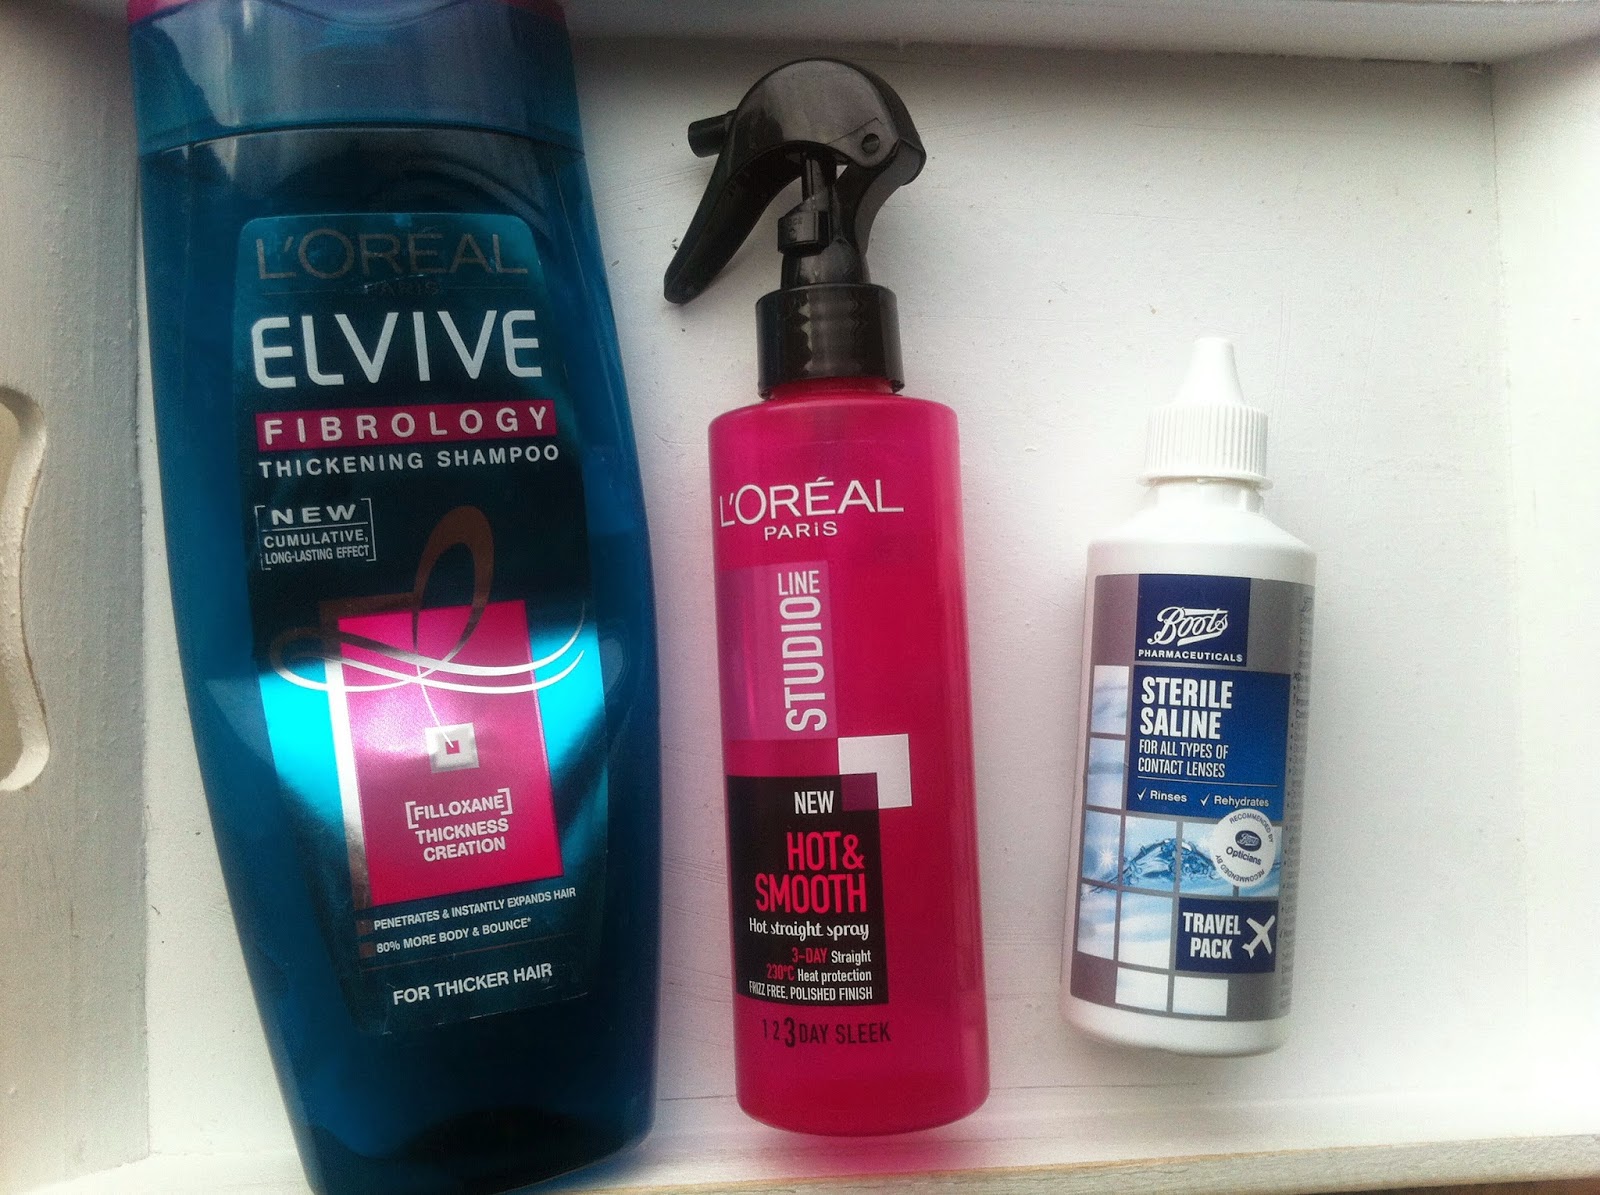 <img src="haircare empties 1.JPG" alt="product haircare misc empties">